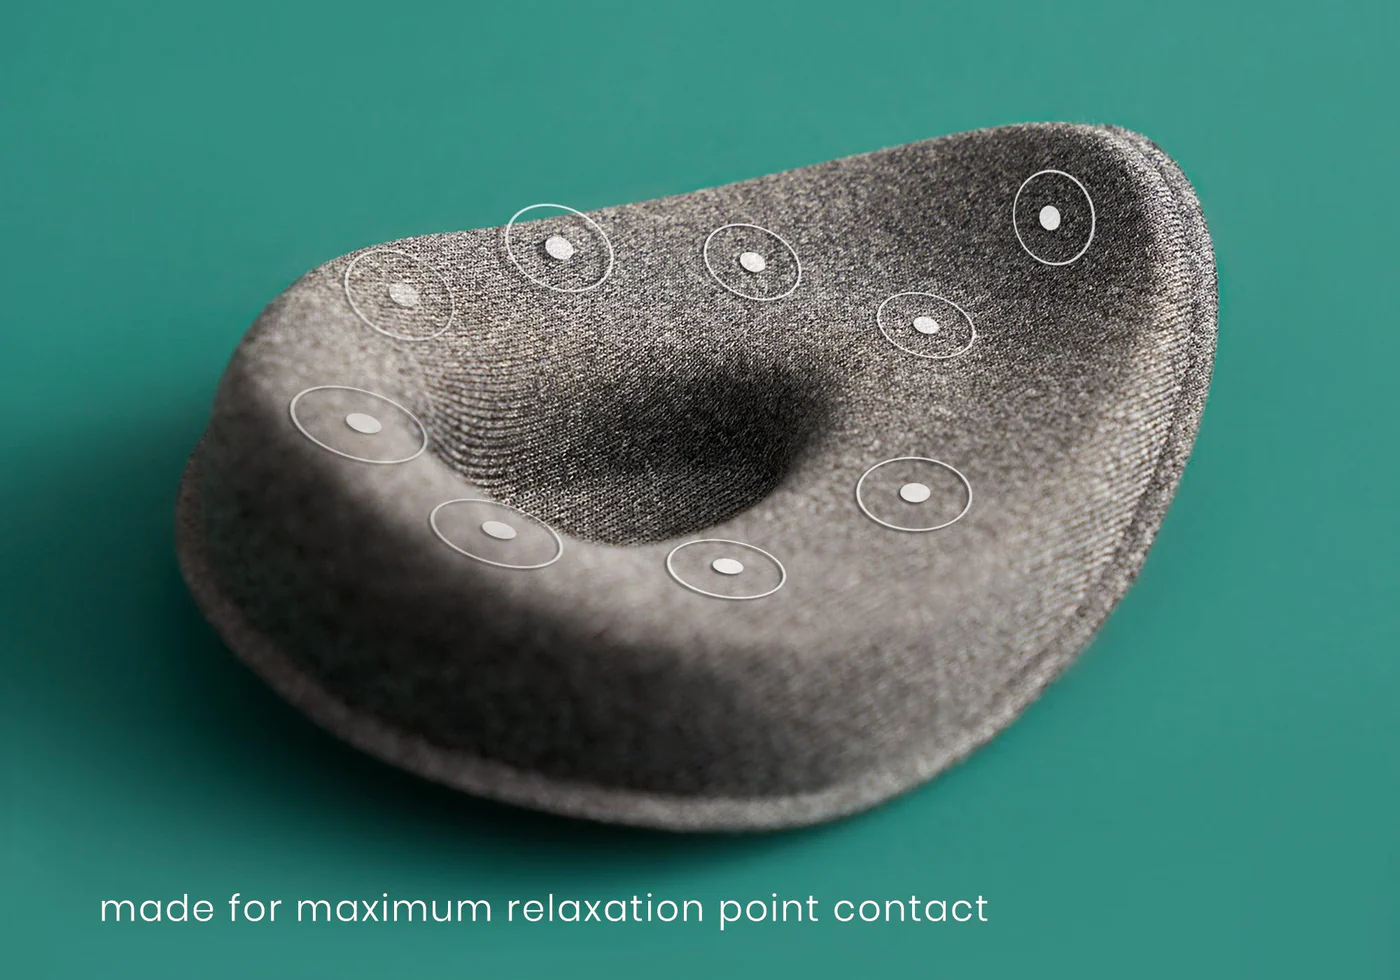 A gray tapered eye cup of a pressure eye mask with circular illustrations indicating pressure points.